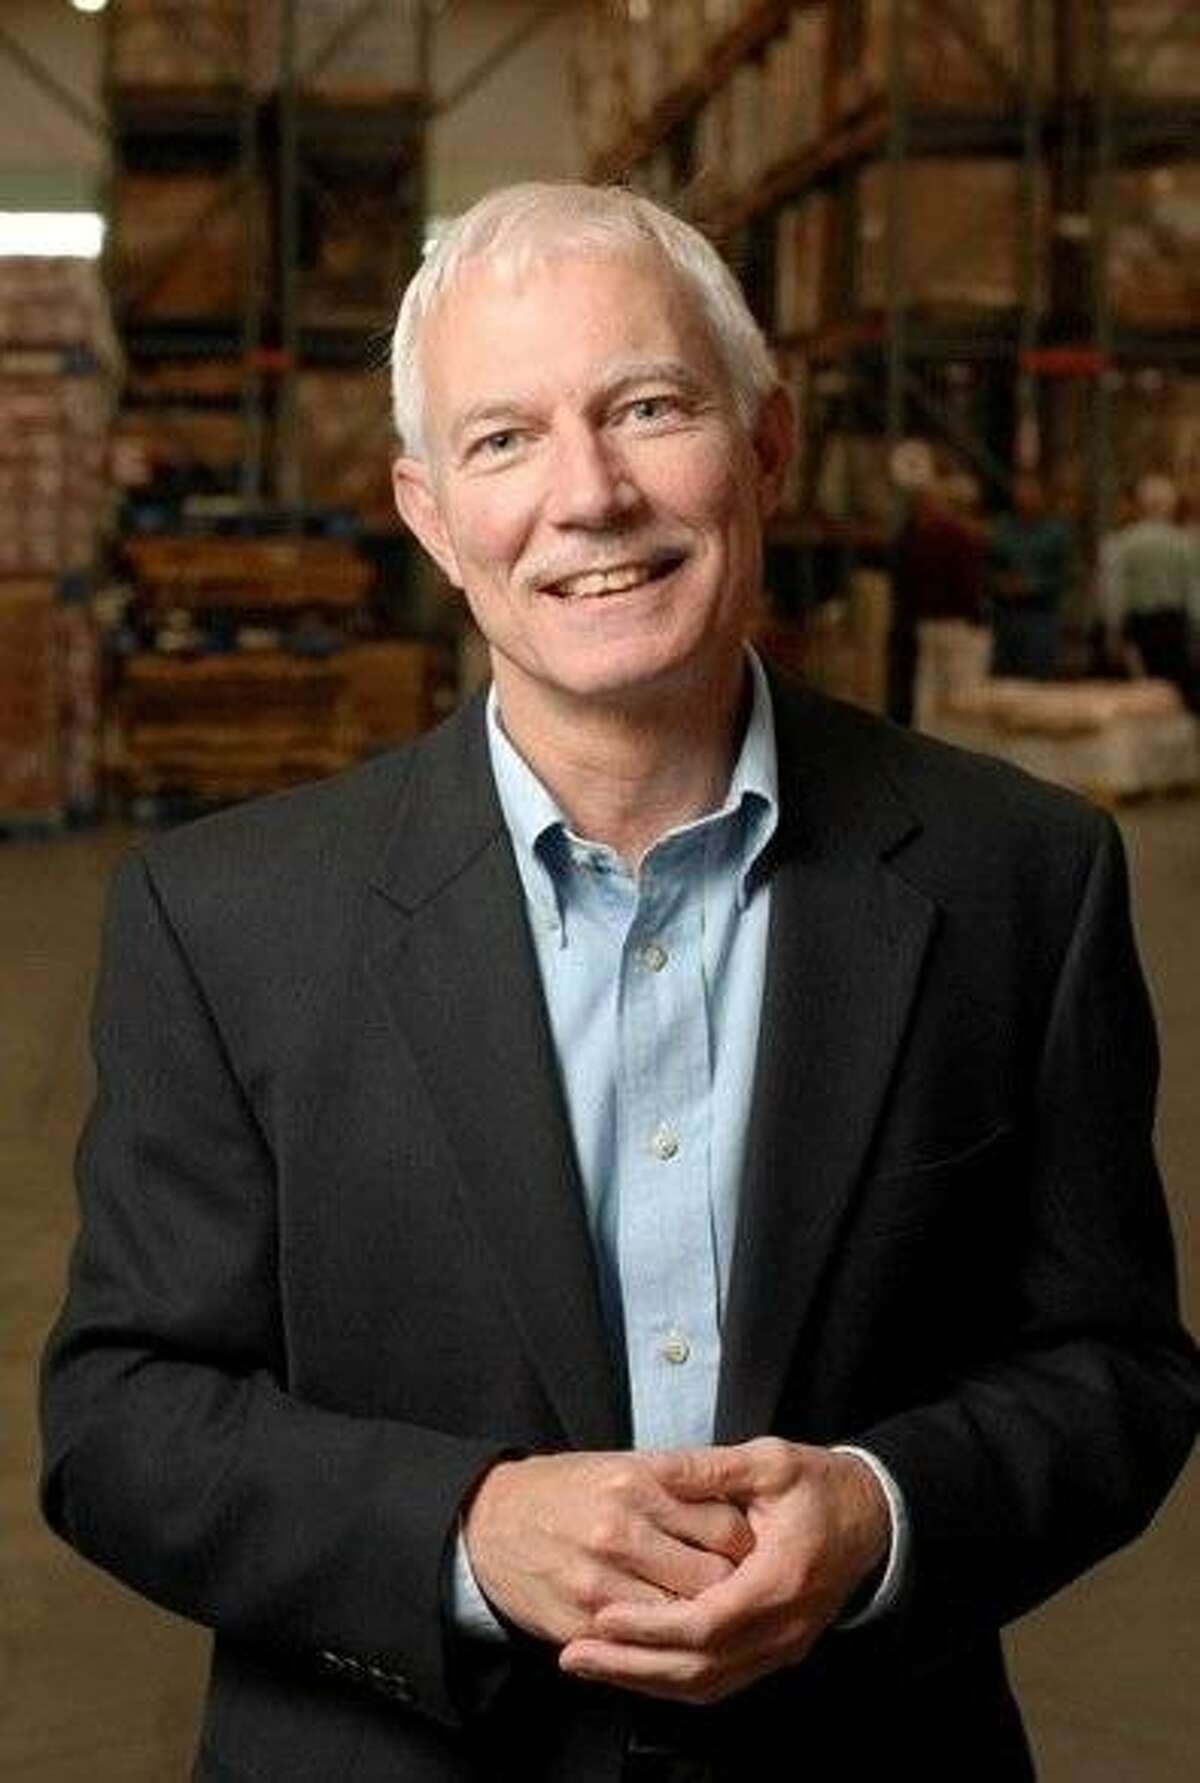 Paul Ash has been the executive director of the San Francisco Food Bank for 21 years.